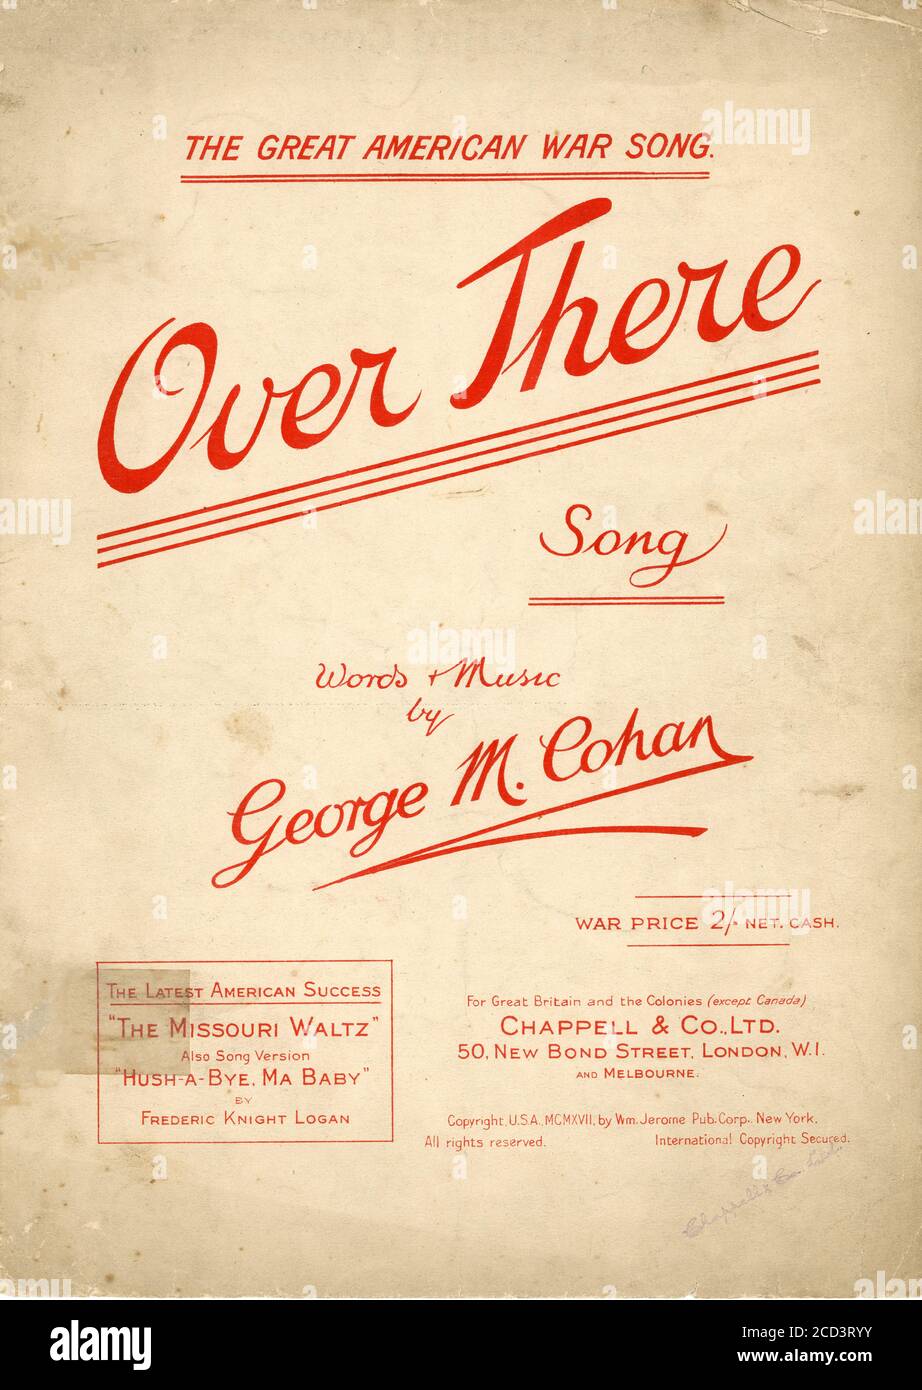 Sheet Music - Over there - by George Cohan - 1917 Stock Photo